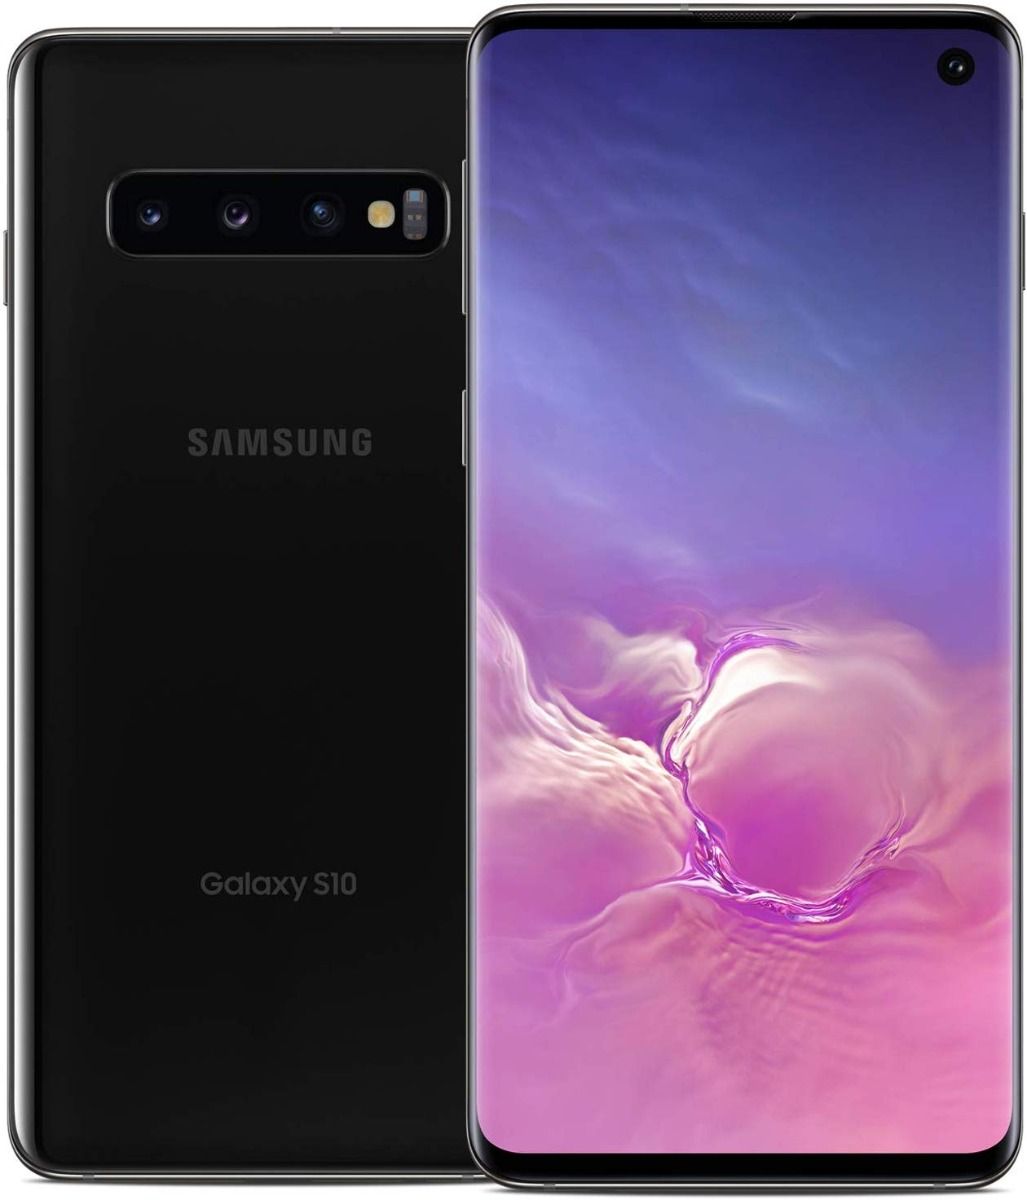 Samsung Galaxy S10 512GB Prism Black With Case, Glass Screen Protector & Shipping (Excellent)